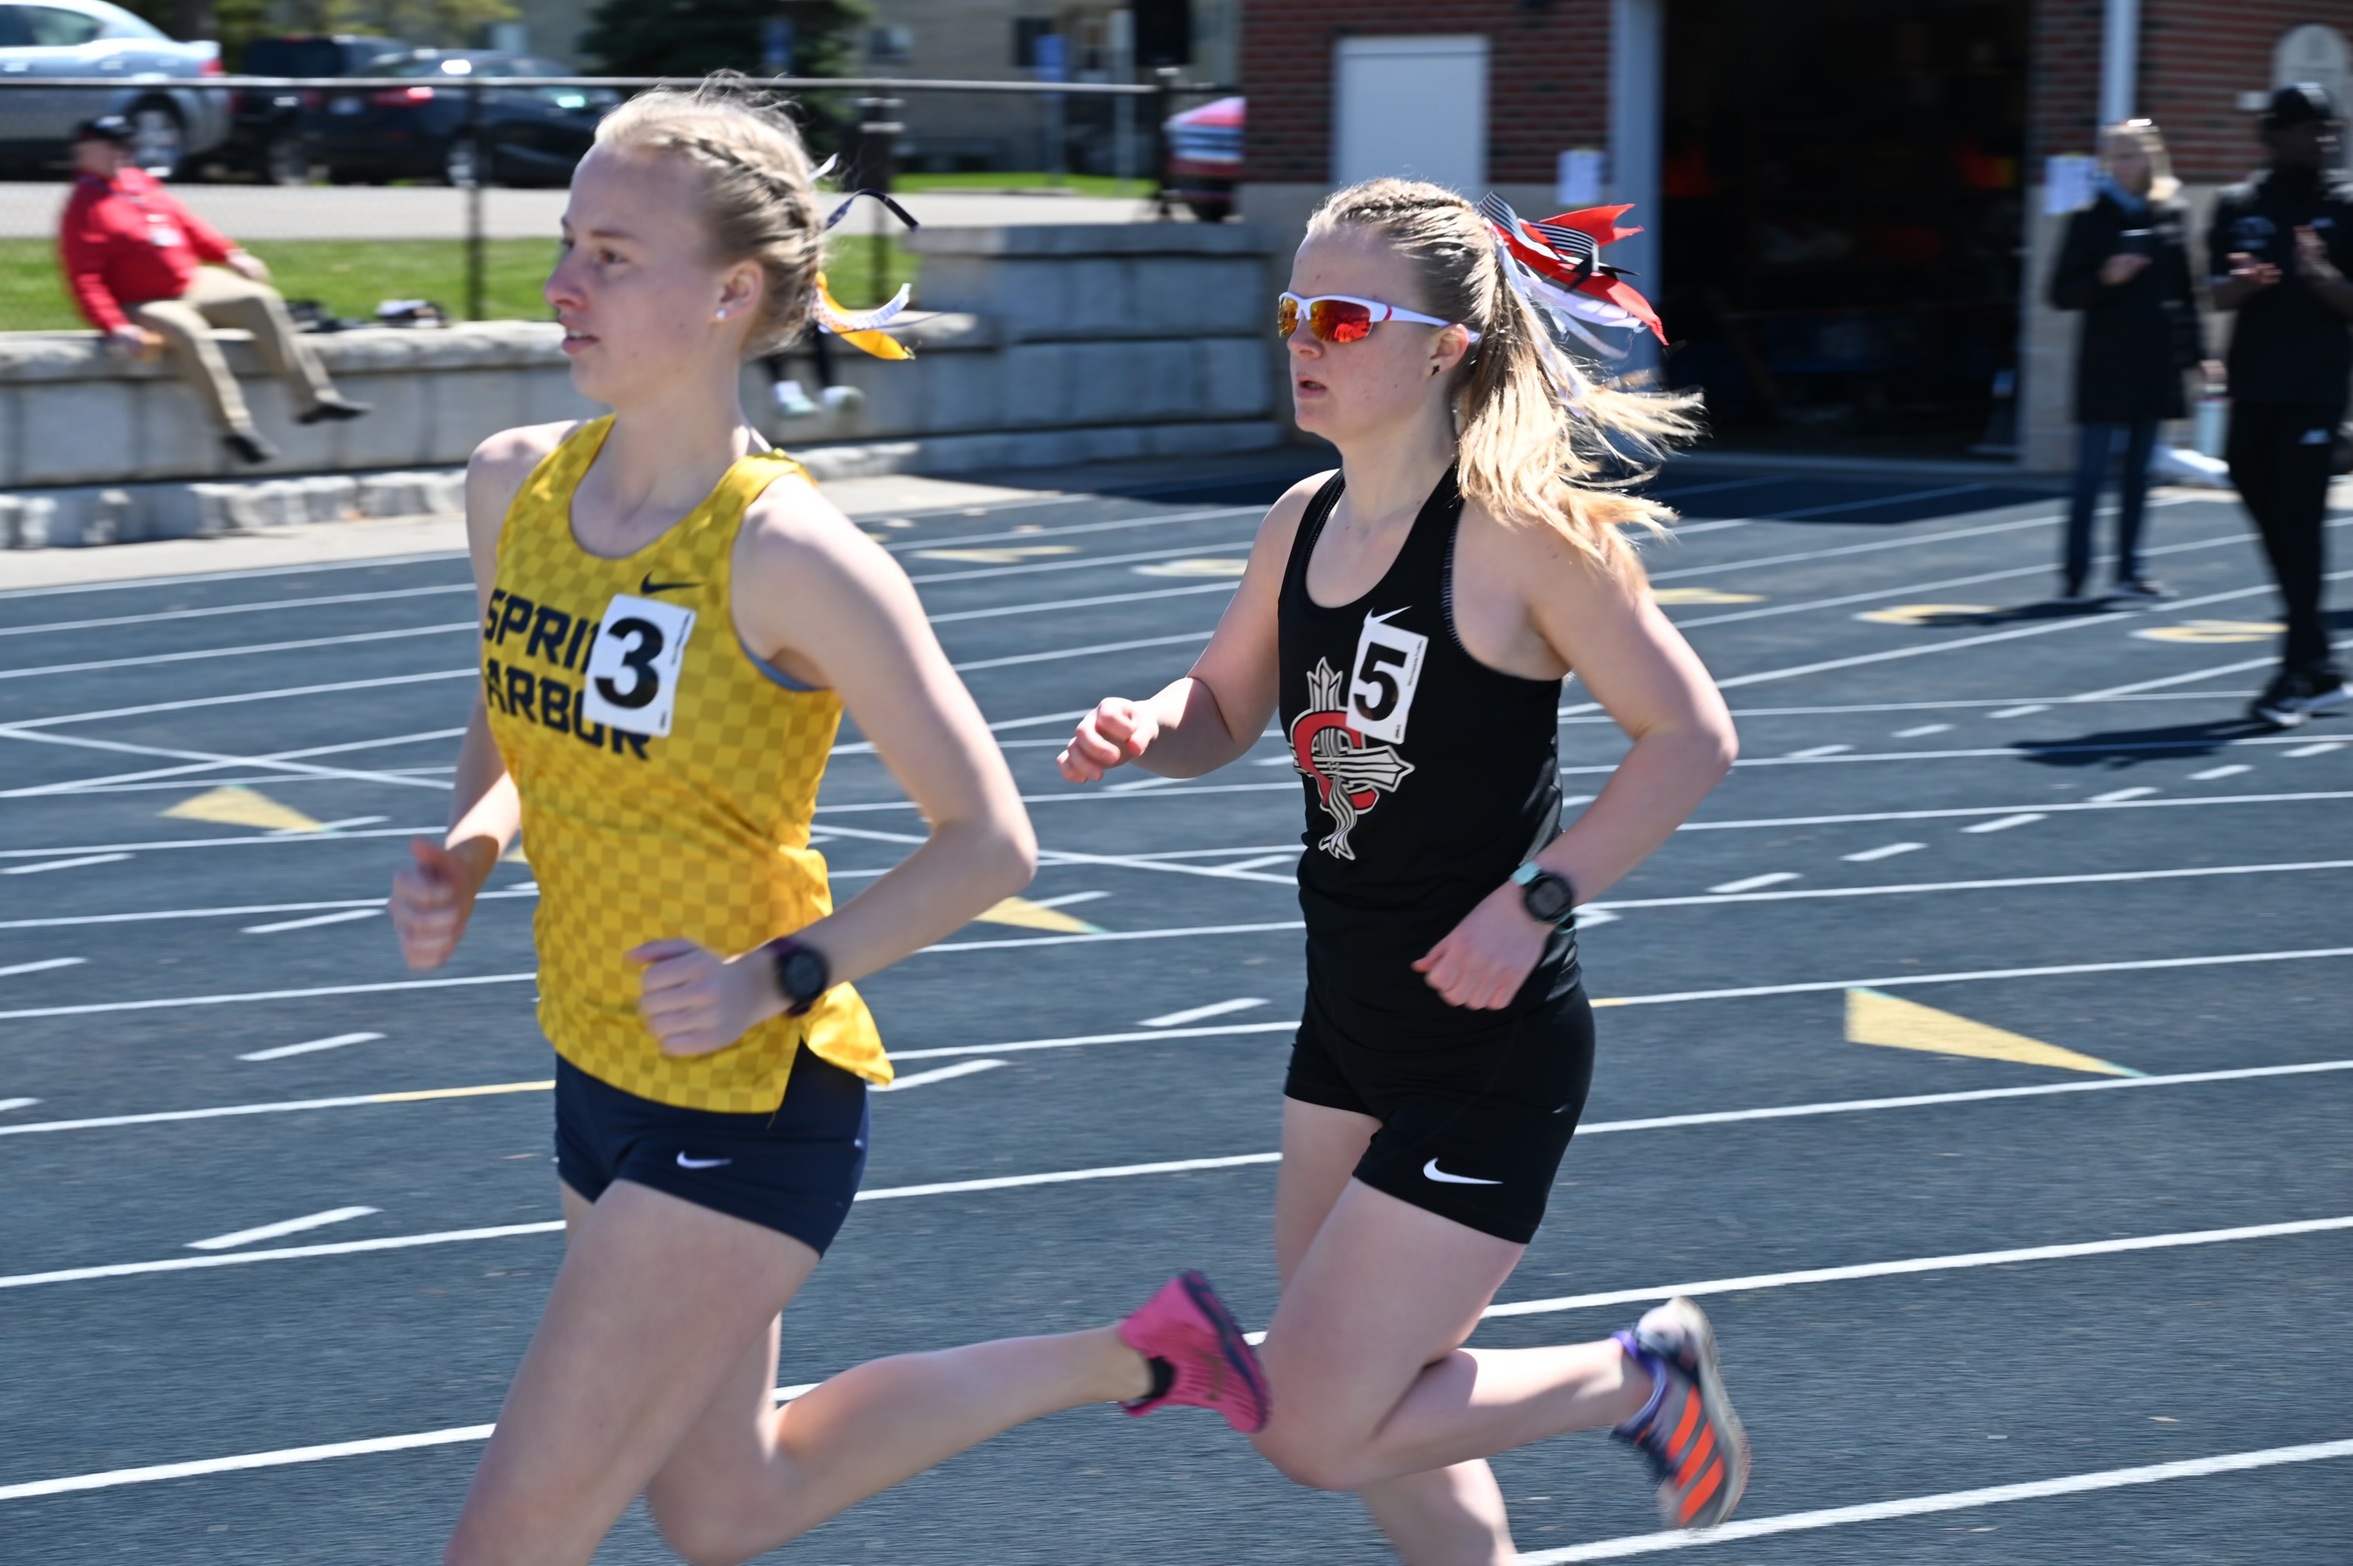 Women's Track & Field saw Distance Runners excel on day 2 of Tiffin Carnival